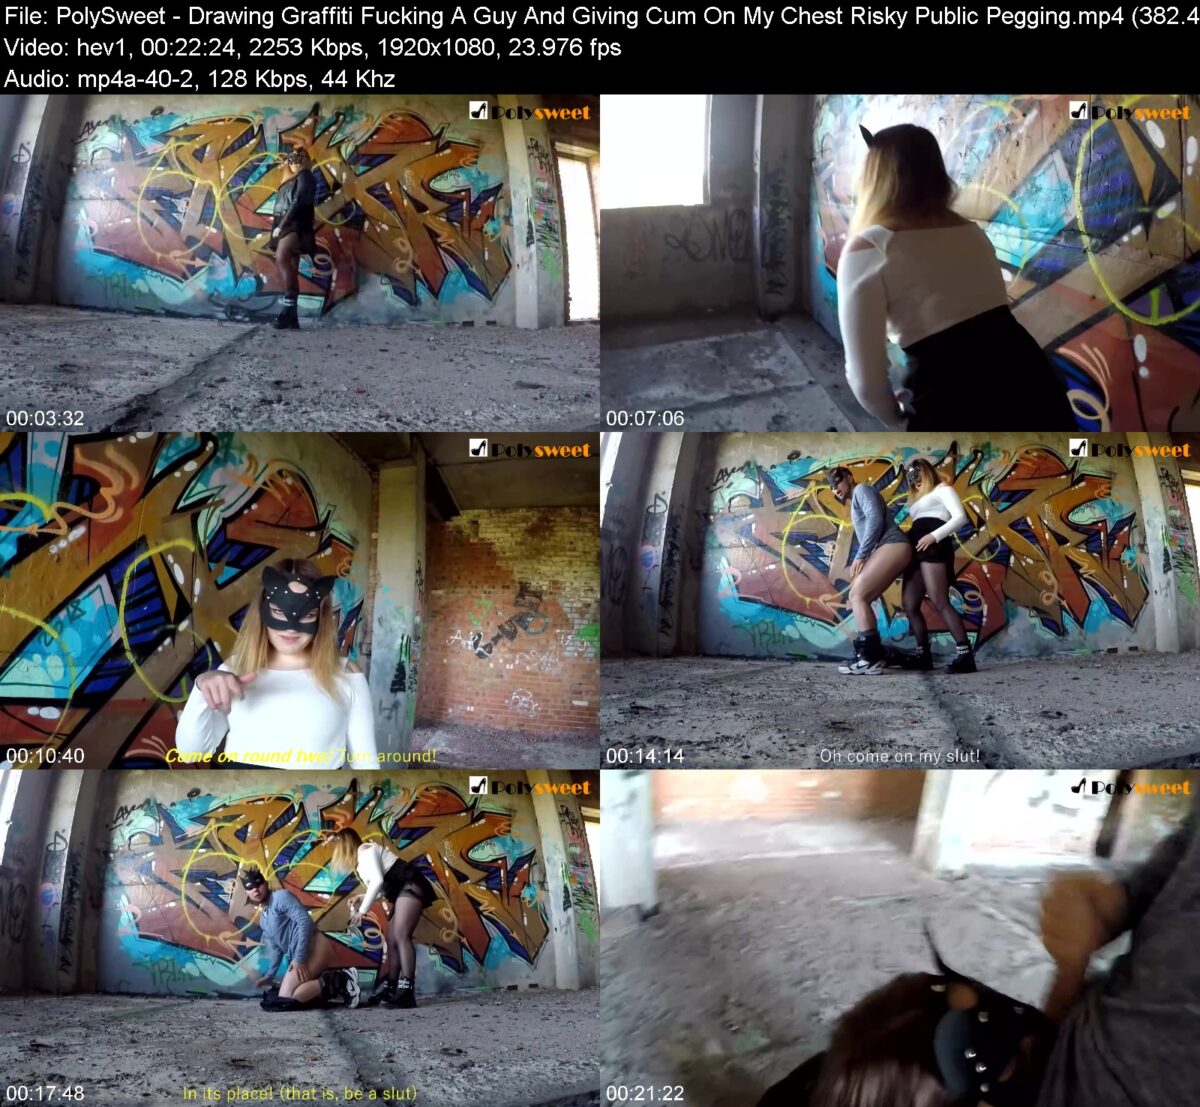 Actress: PolySweet. Title and Studio: Drawing Graffiti Fucking A Guy And Giving Cum On My Chest Risky Public Pegging